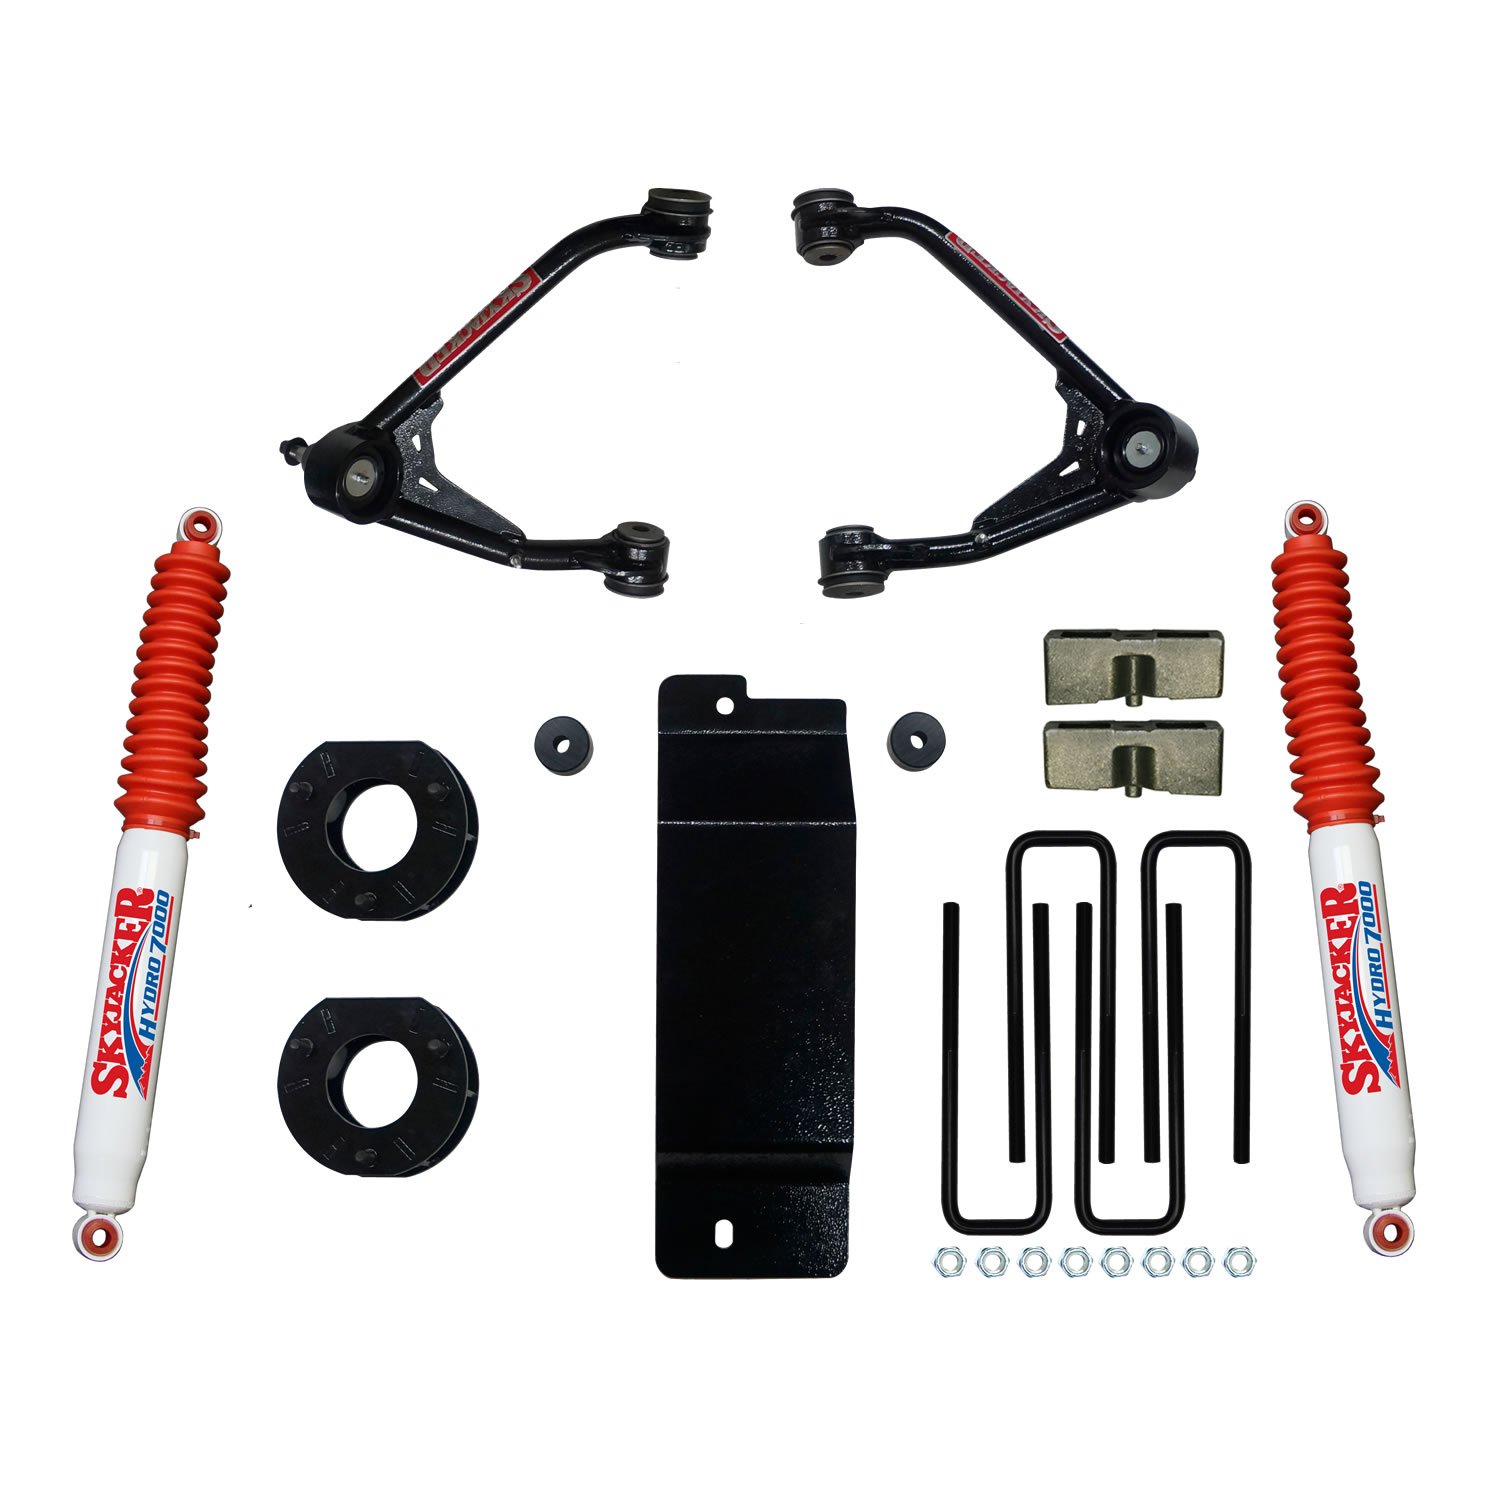 3.000-3.500 In. Upper Control Arm Lift Kit with B8500 Shocks for 2011-2019 GM HD Trucks